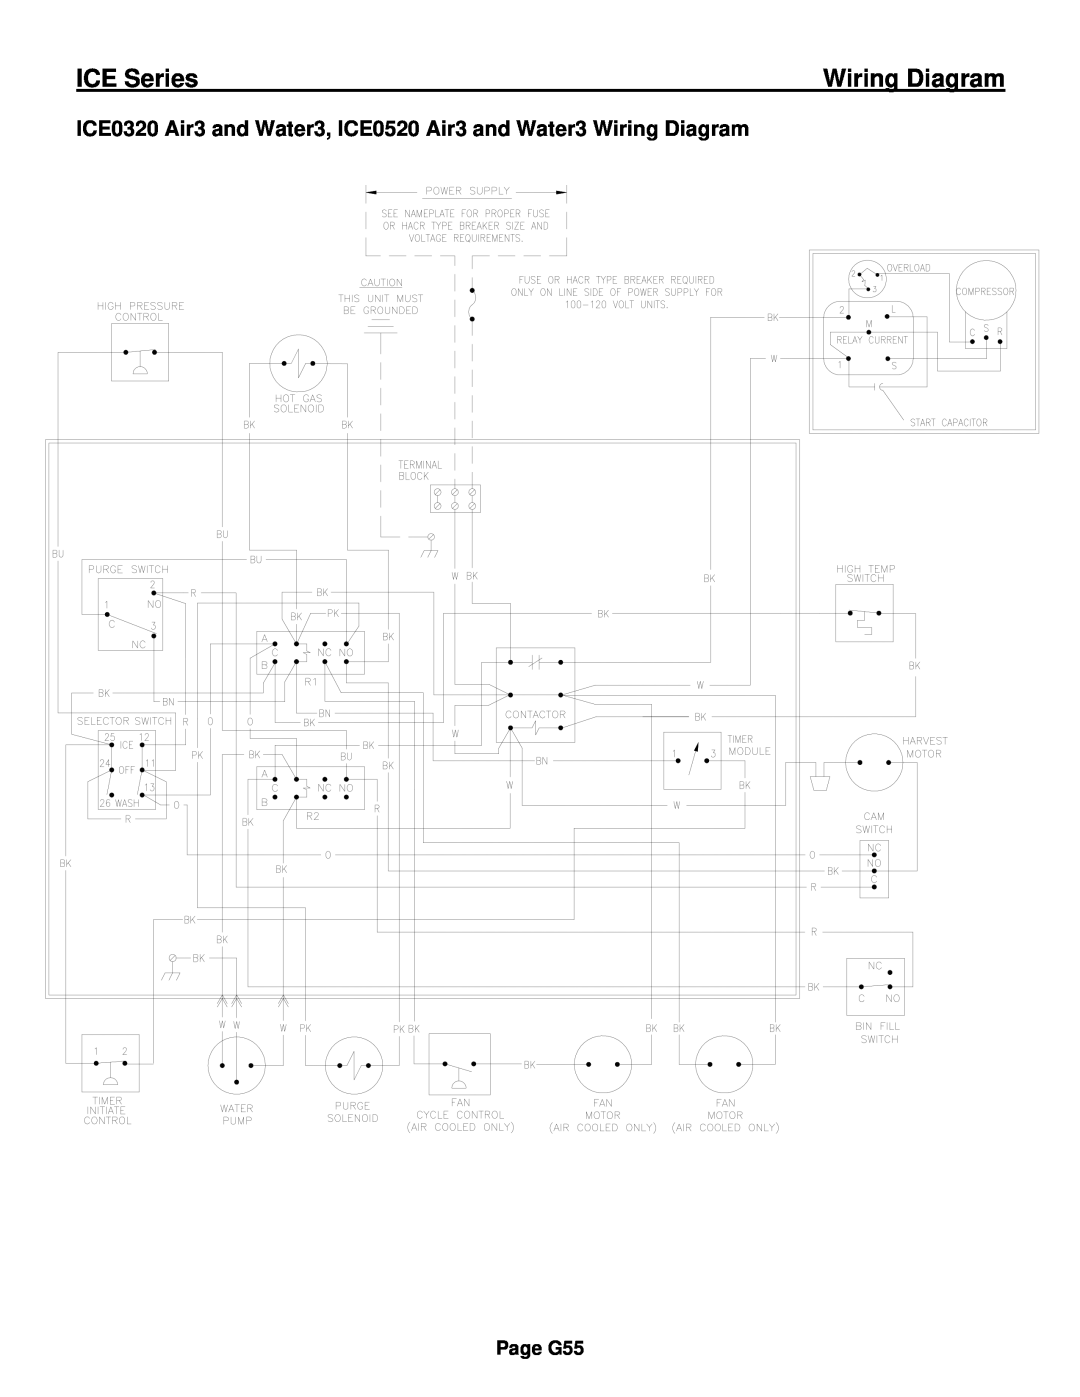 Ice-O-Matic ICE0250 Series ICE0320 Air3 and Water3, ICE0520 Air3 and Water3 Wiring Diagram, ICE Series, Page G55 